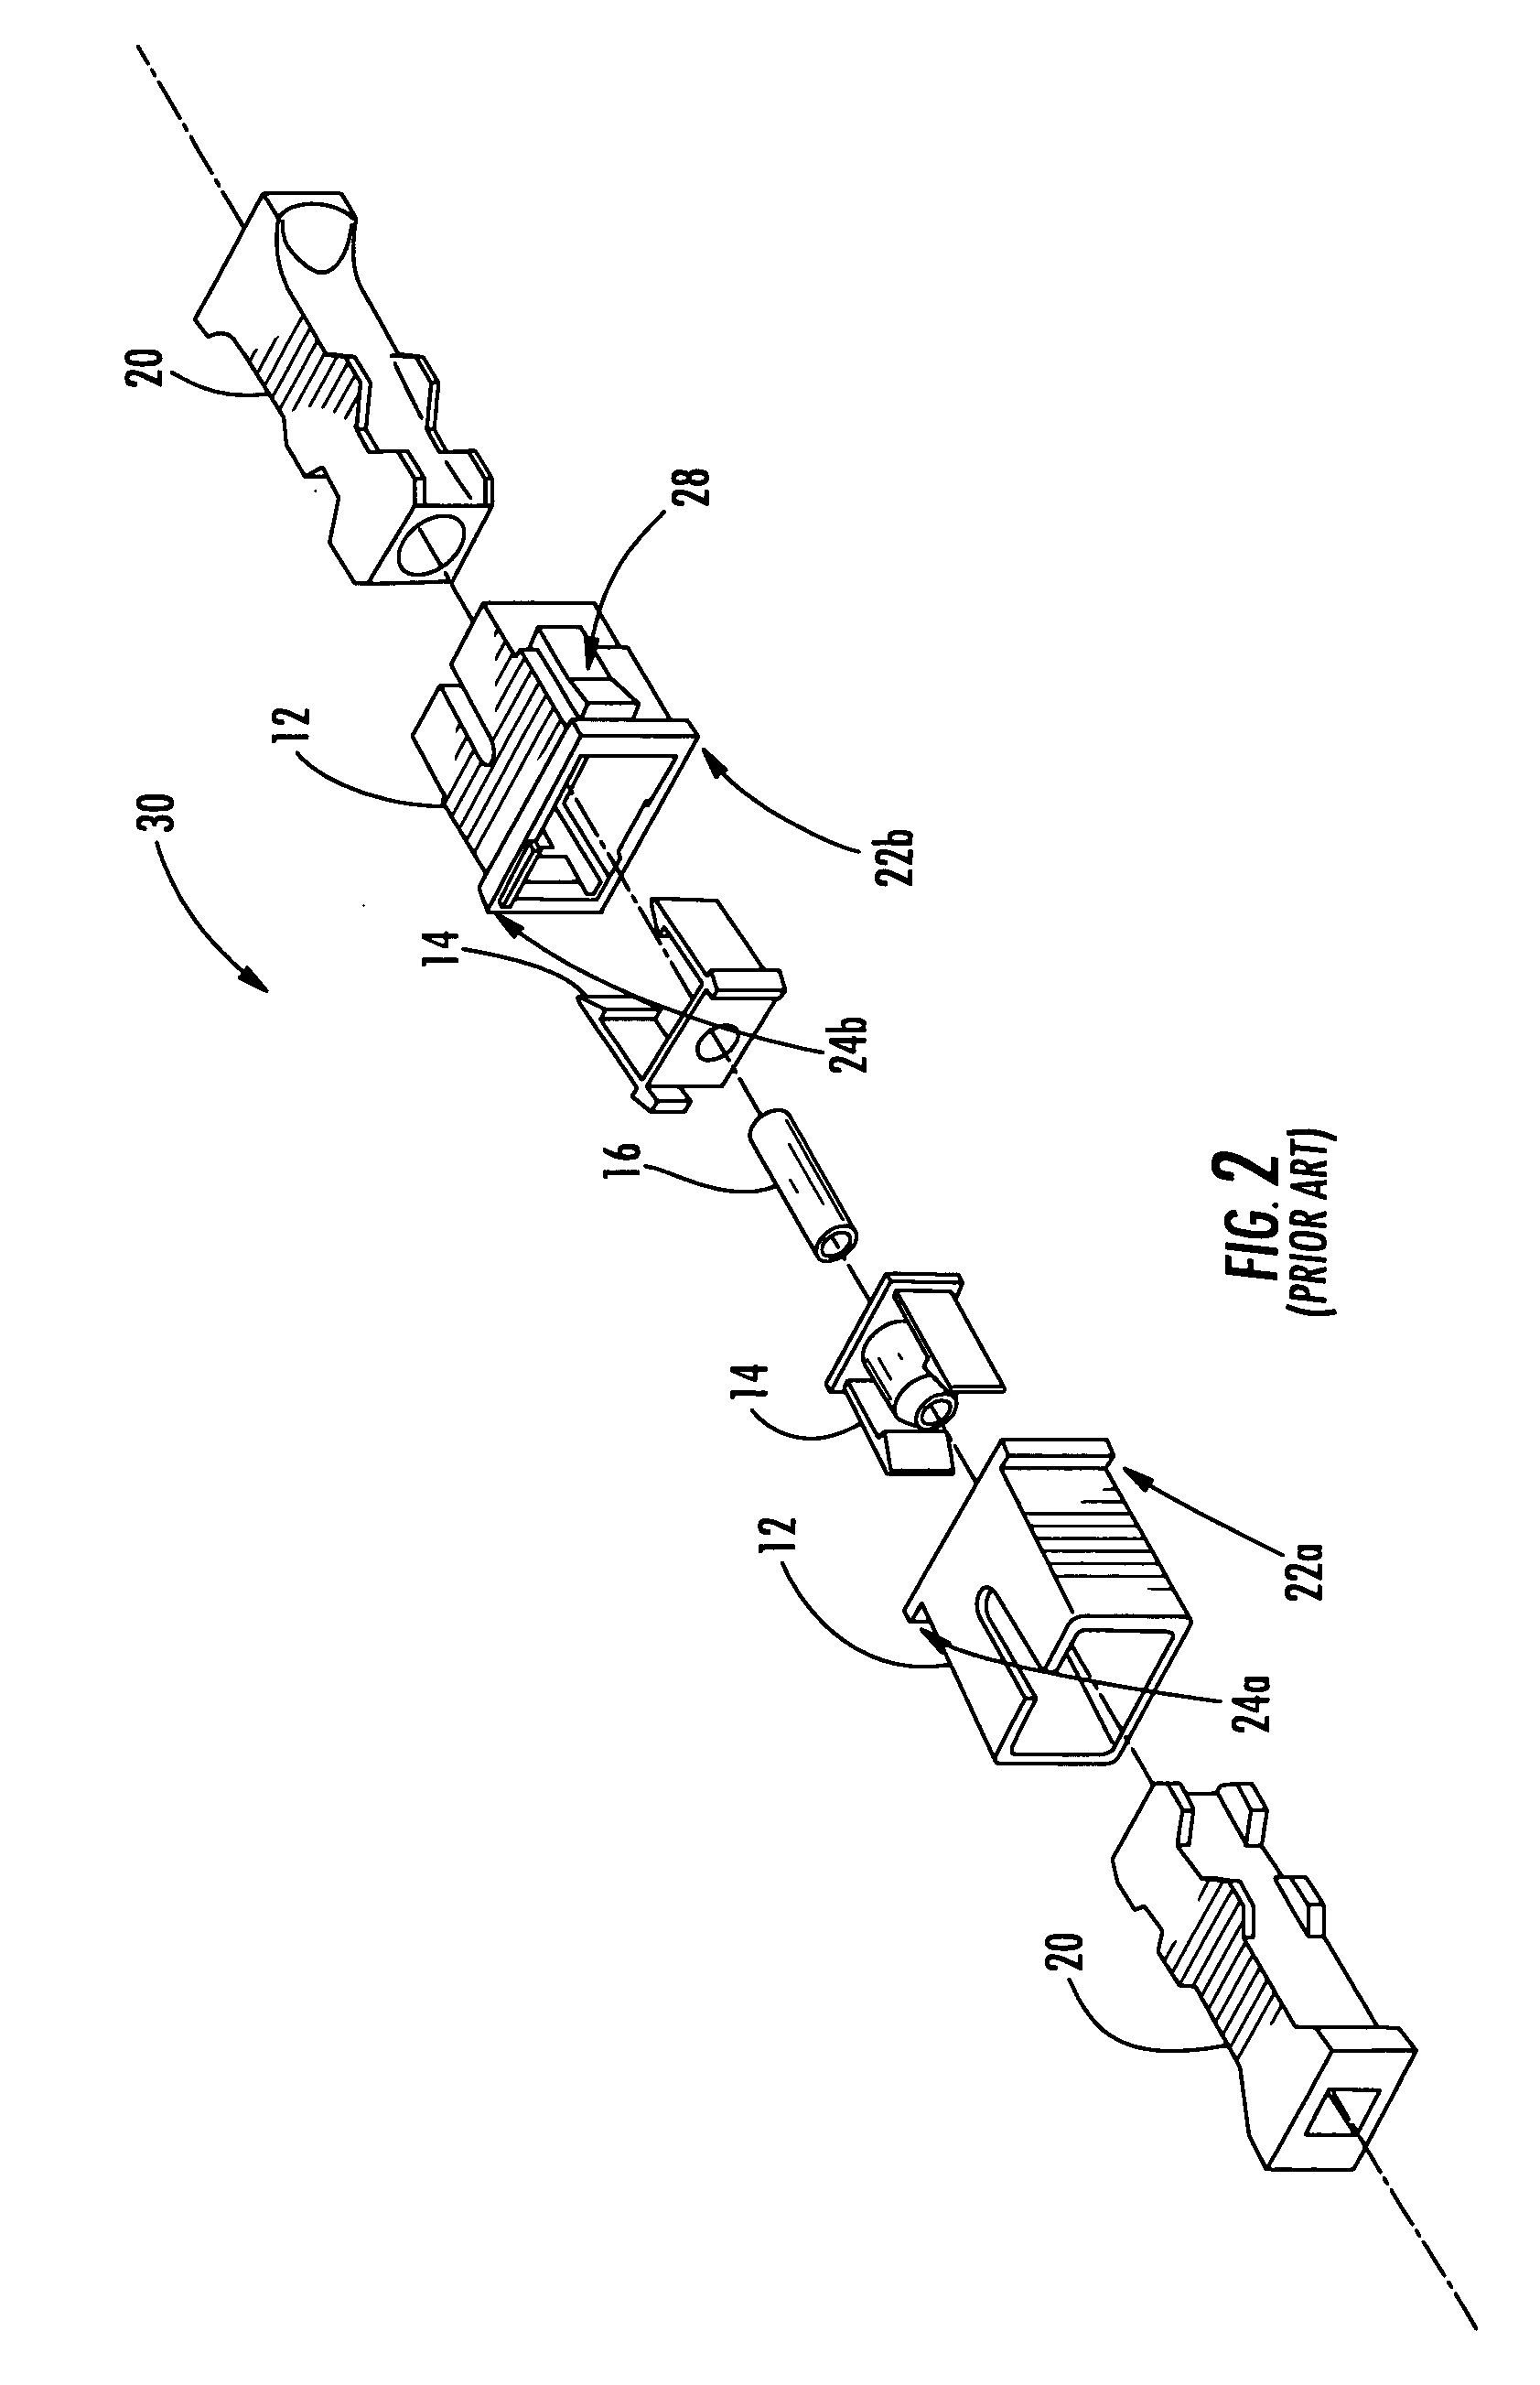 Fiber optic adapter with integrated shutter